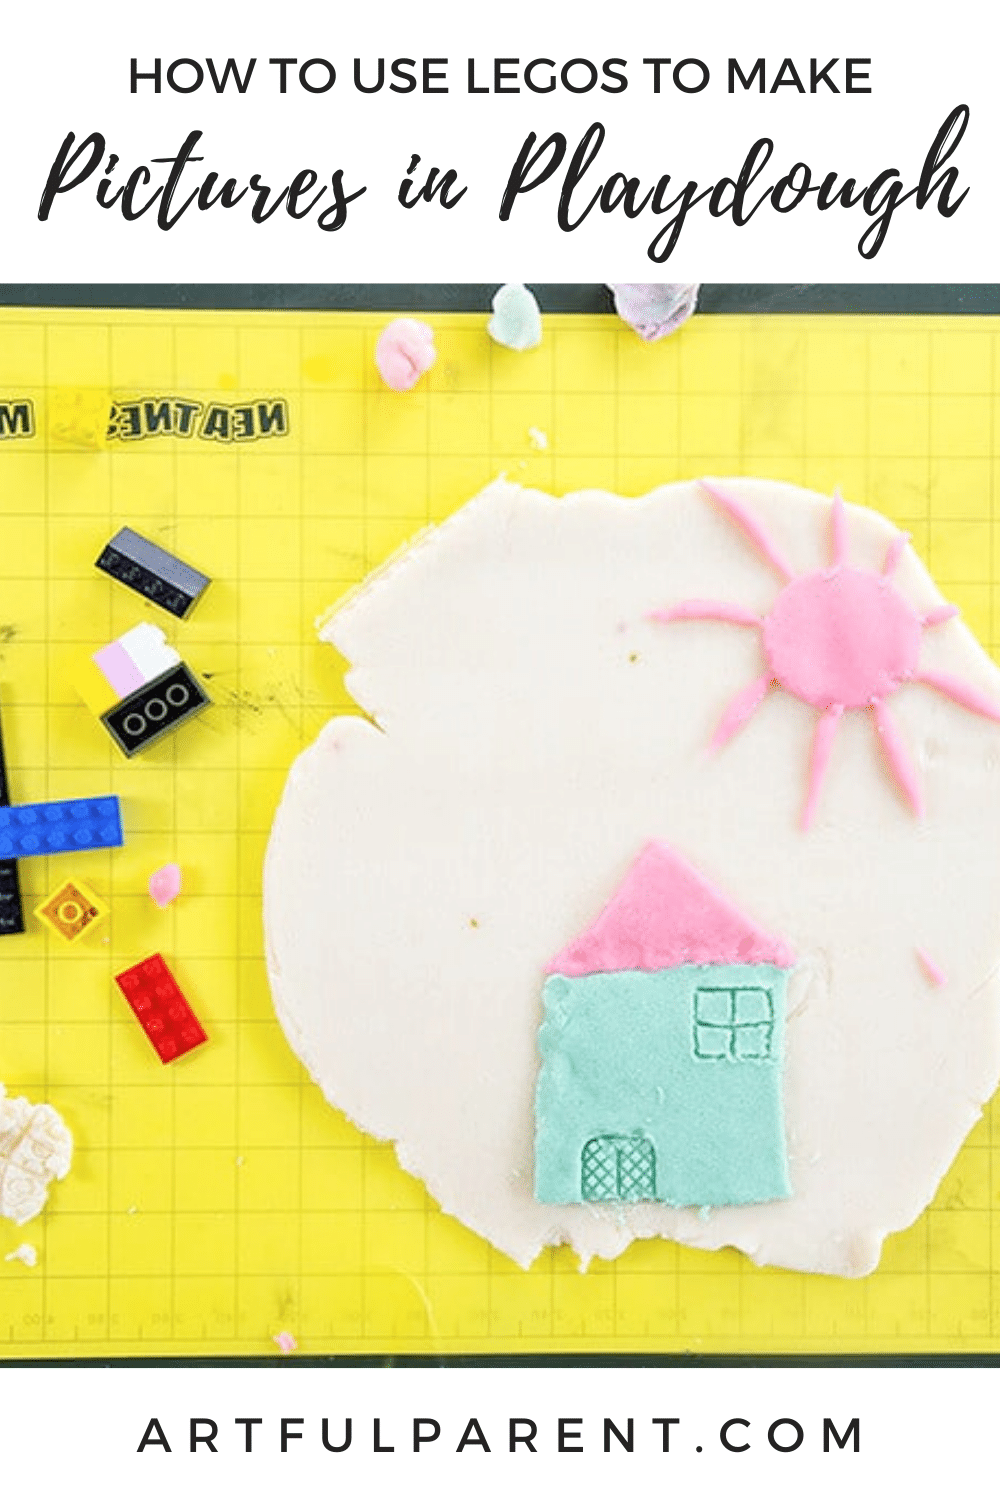 How to Use LEGOs to Make Pictures in Playdough